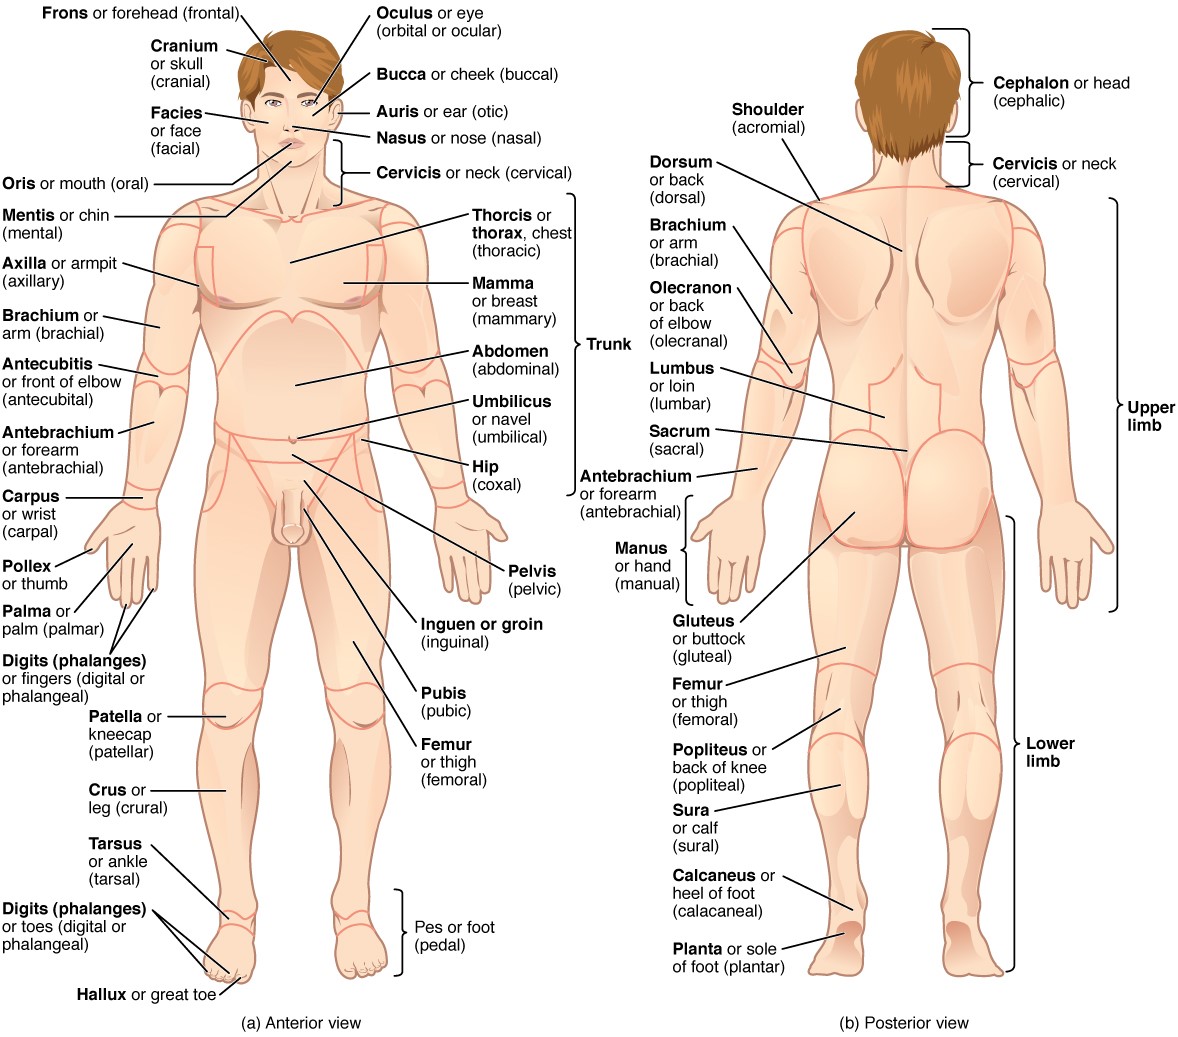 Anterior and posterior view of male anatomy with labels showing different anatomical regional terms